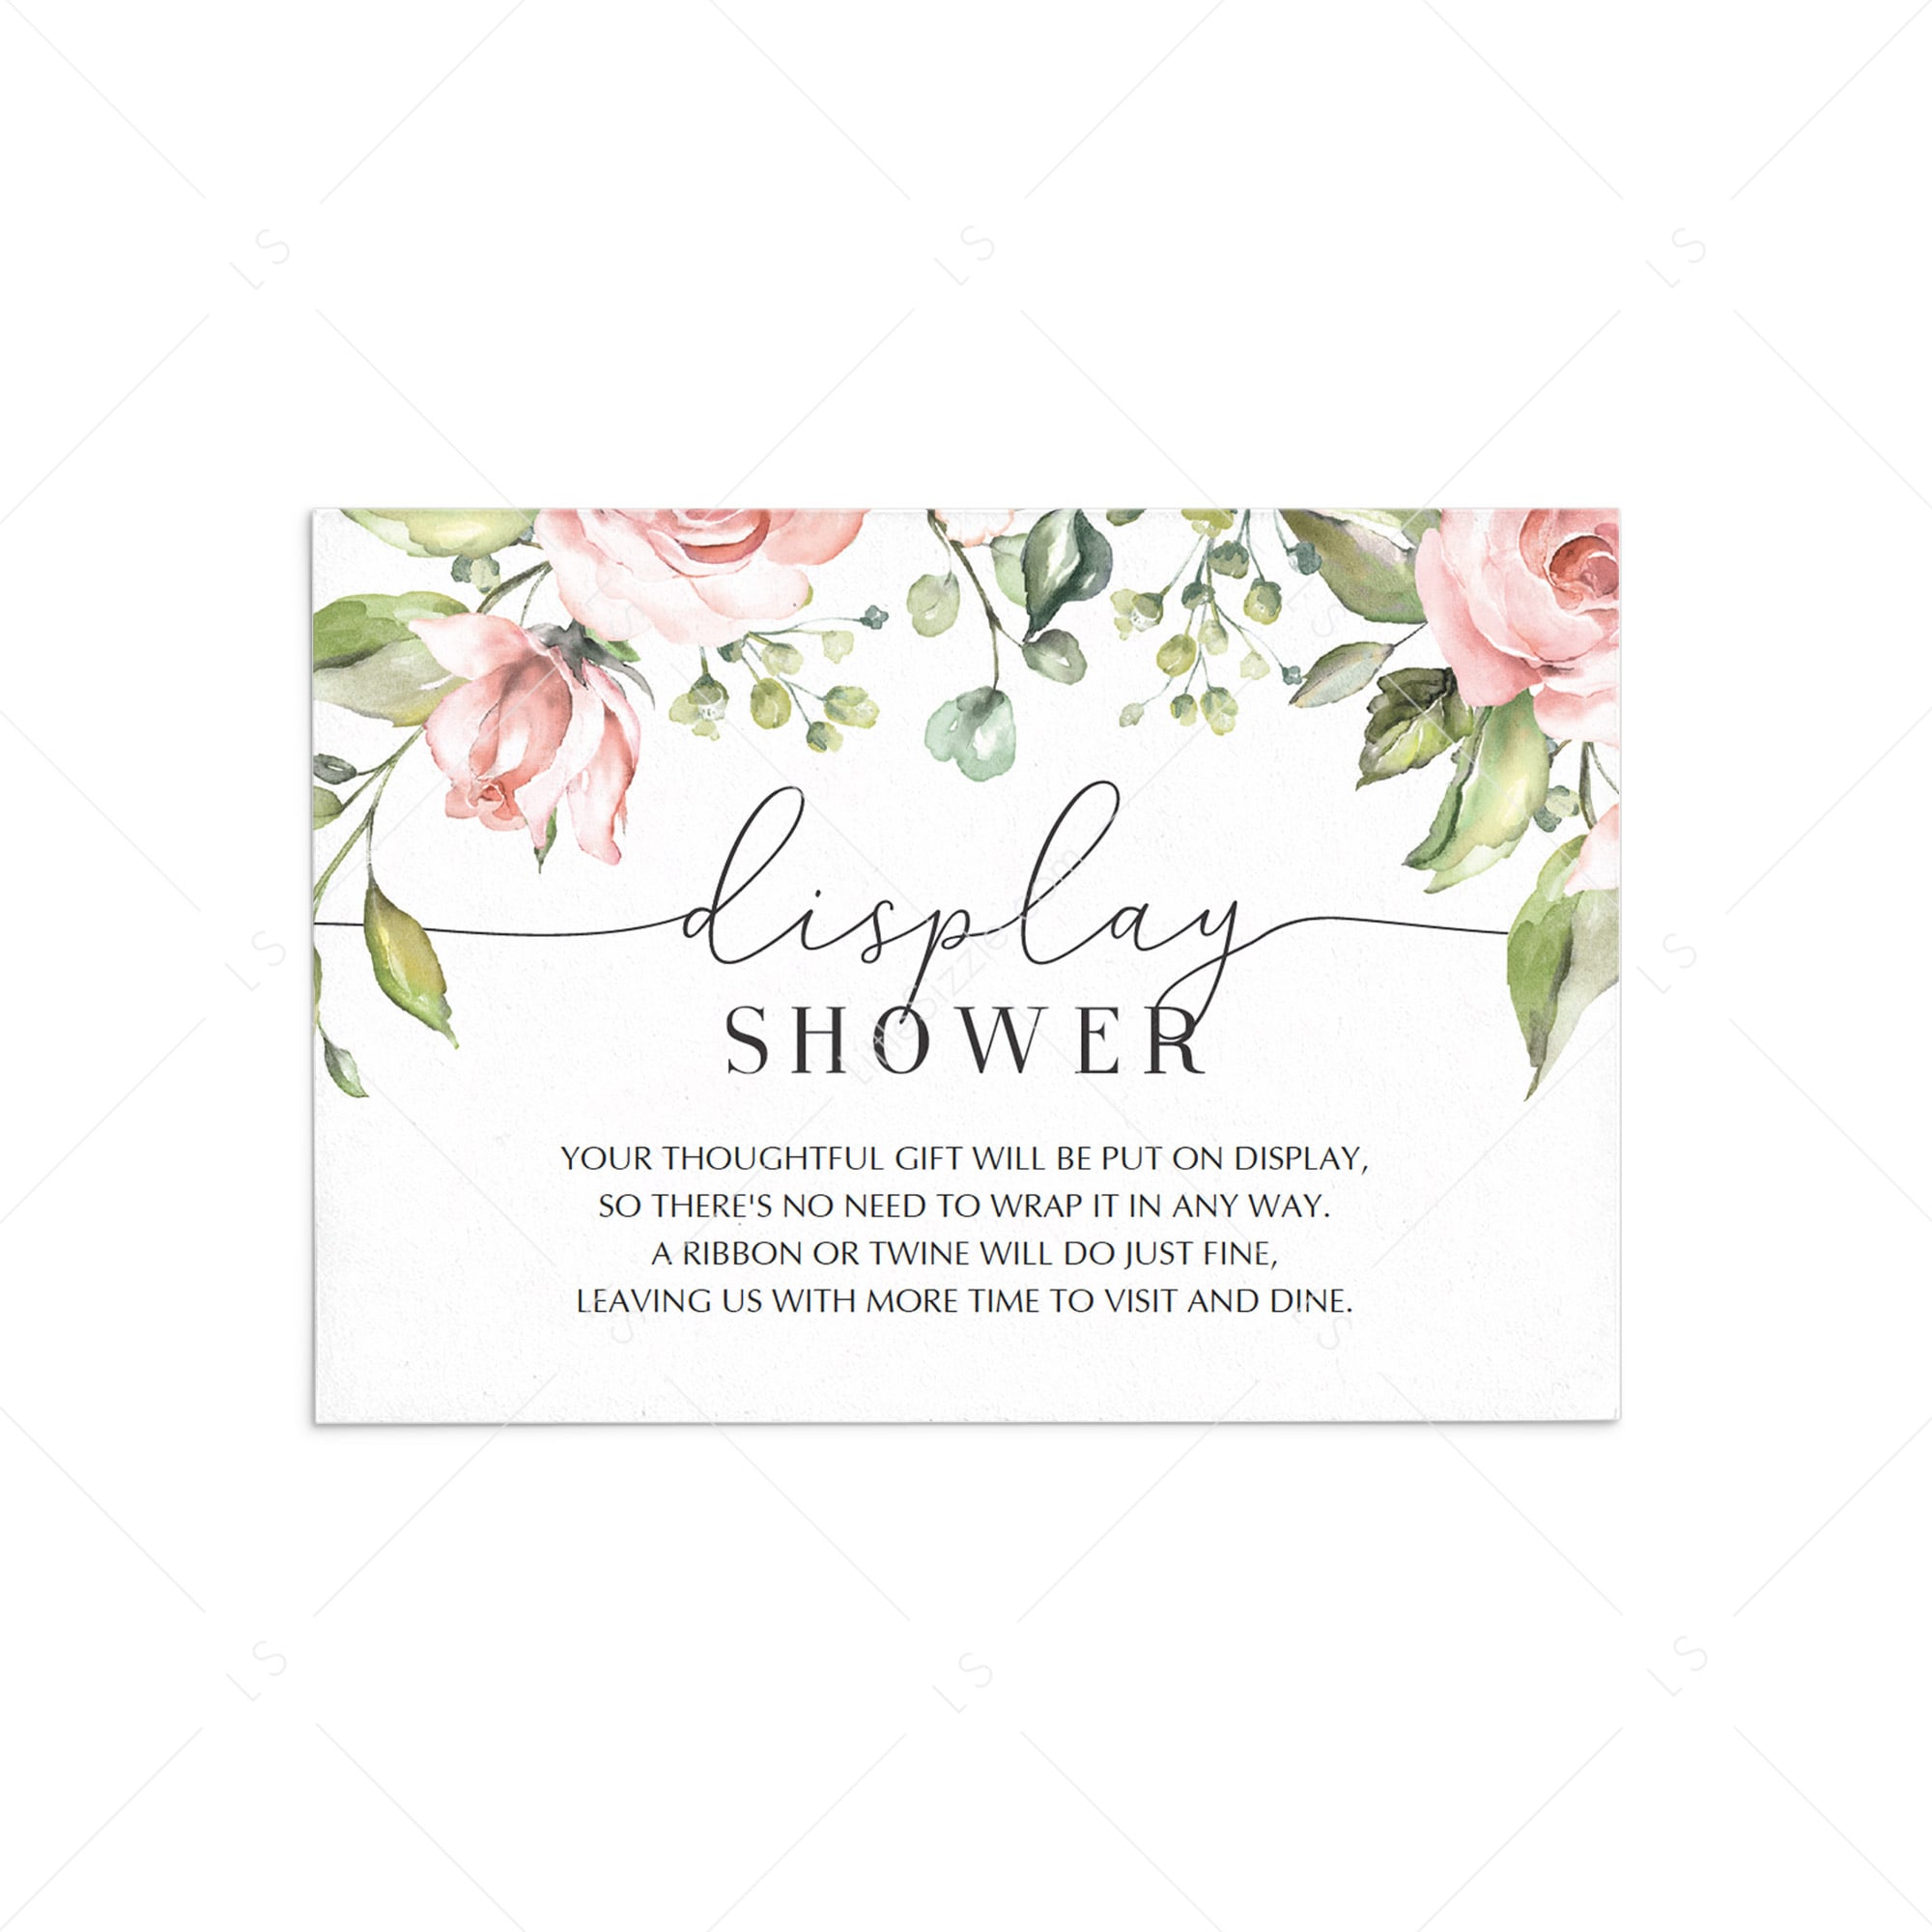 Blush Floral Display Shower Card Printable by LittleSizzle